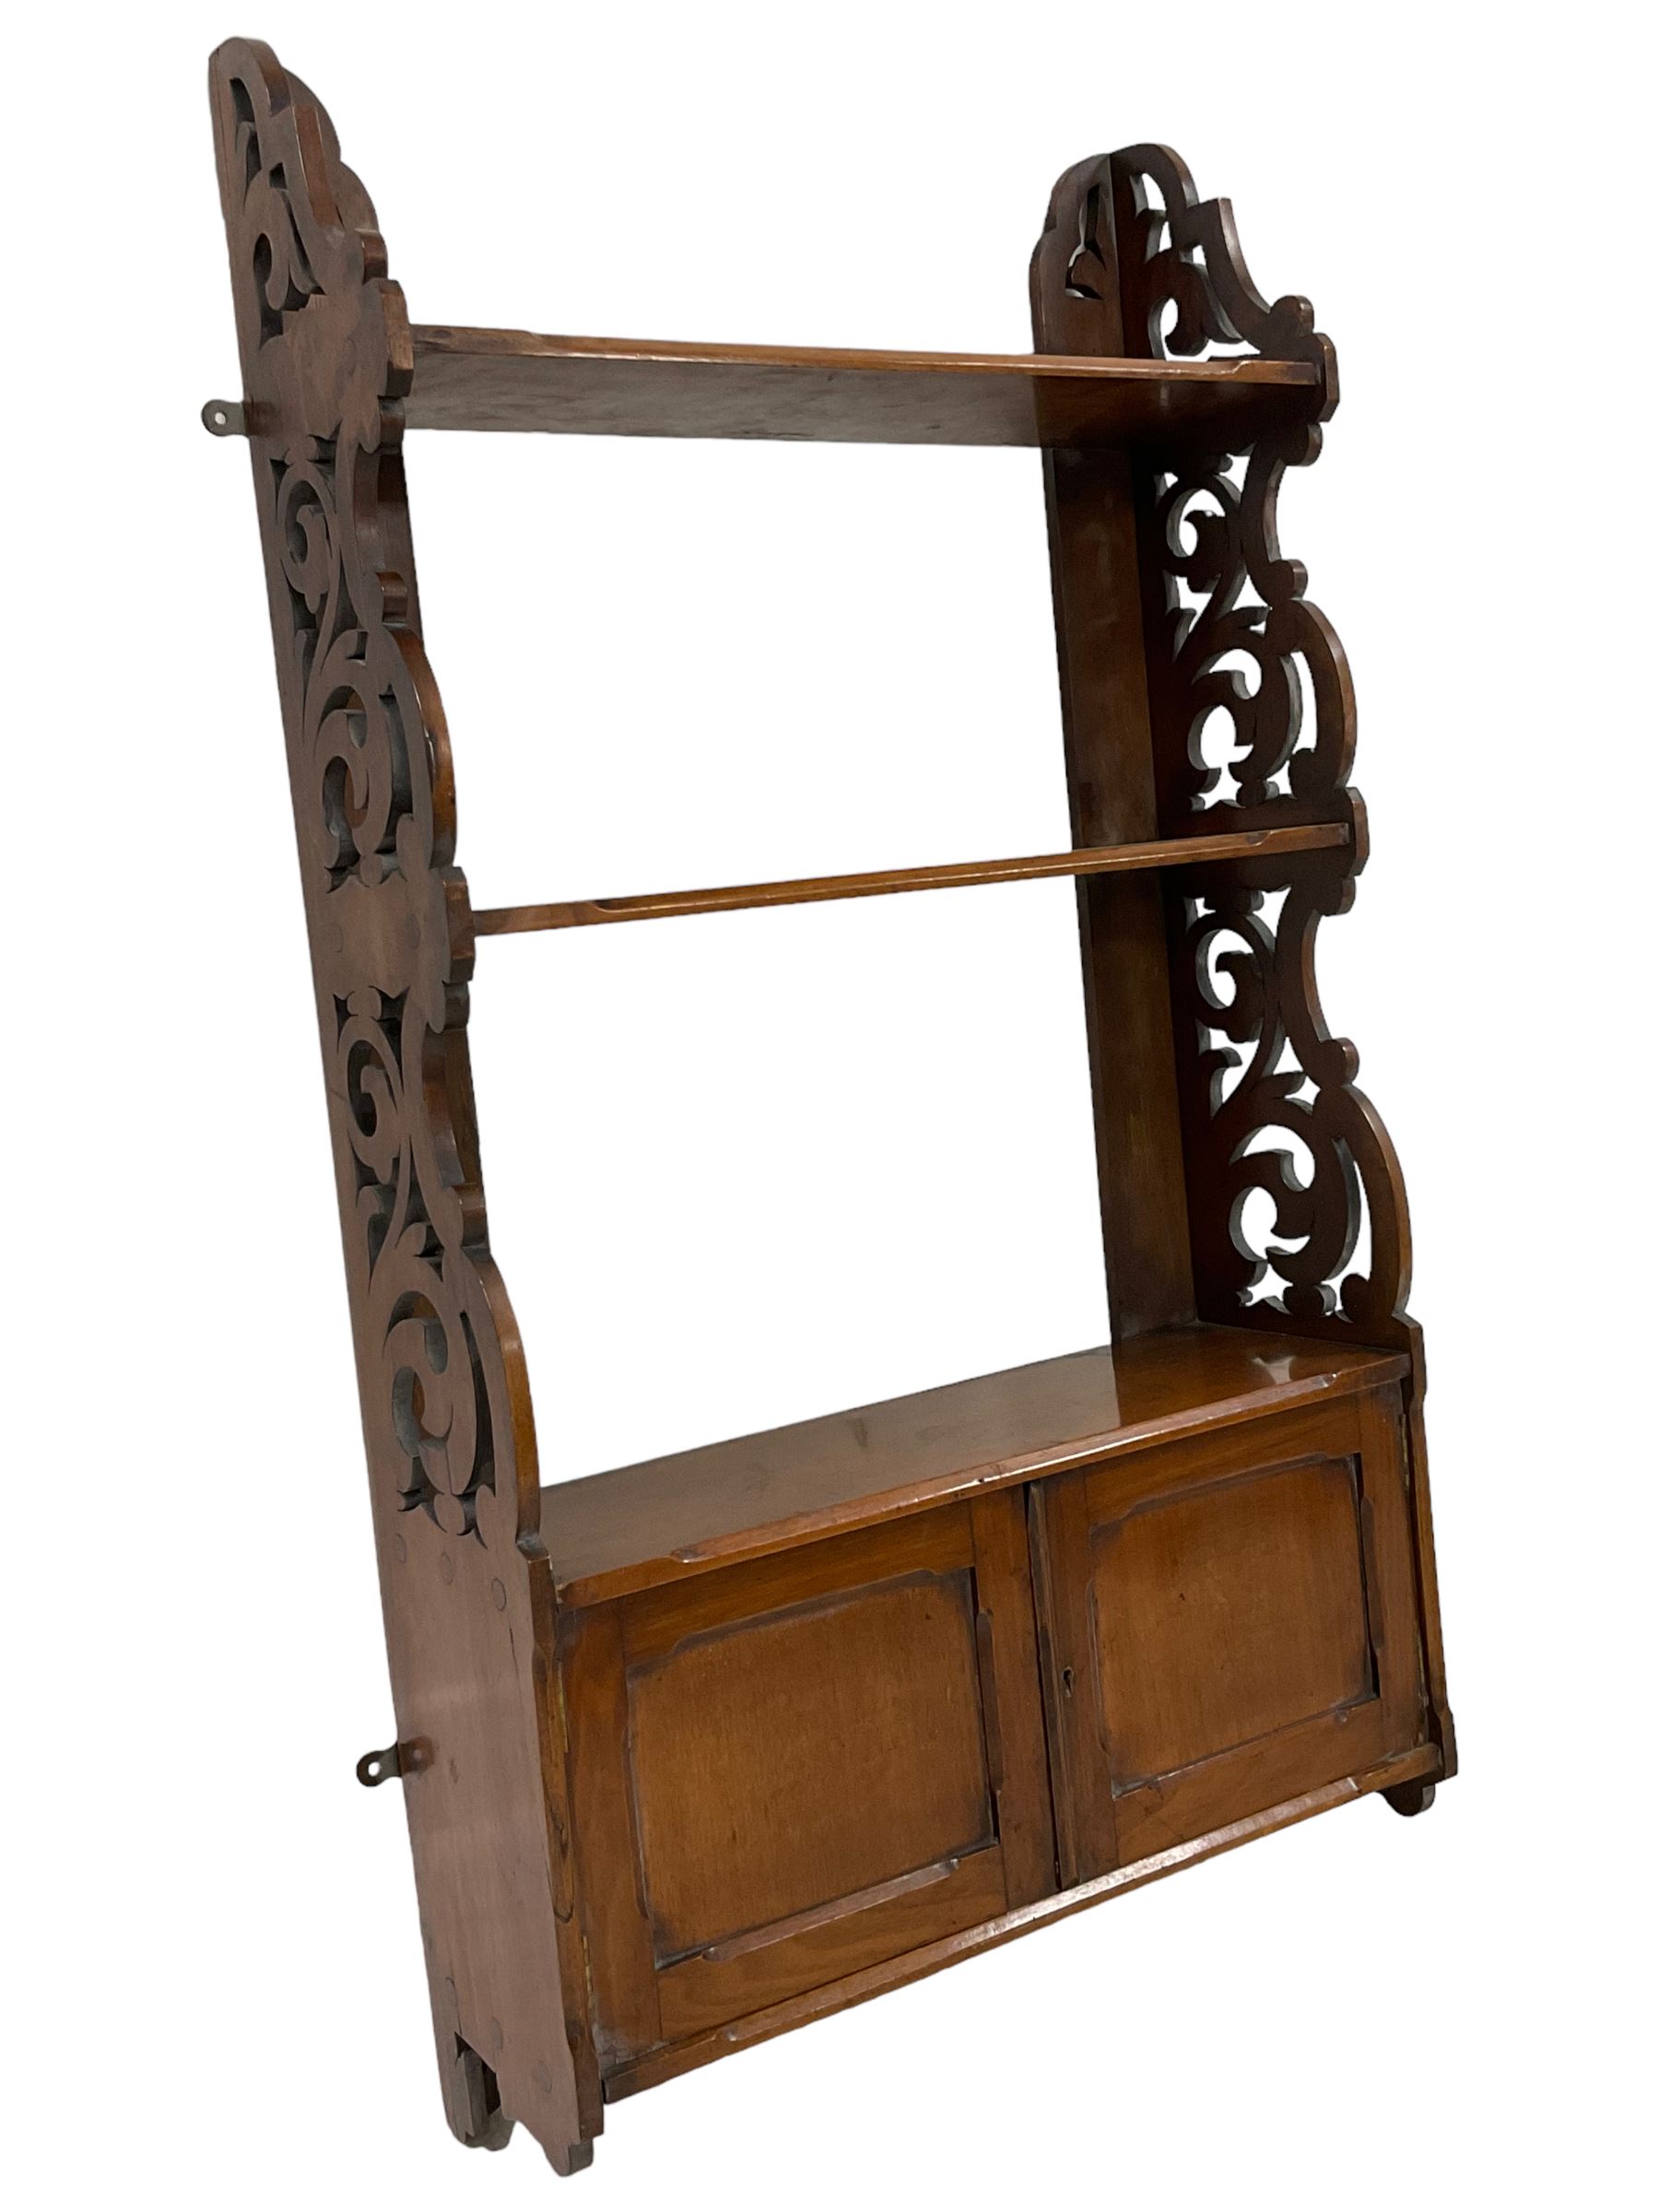 Late 19th century walnut wall hanging bookcase